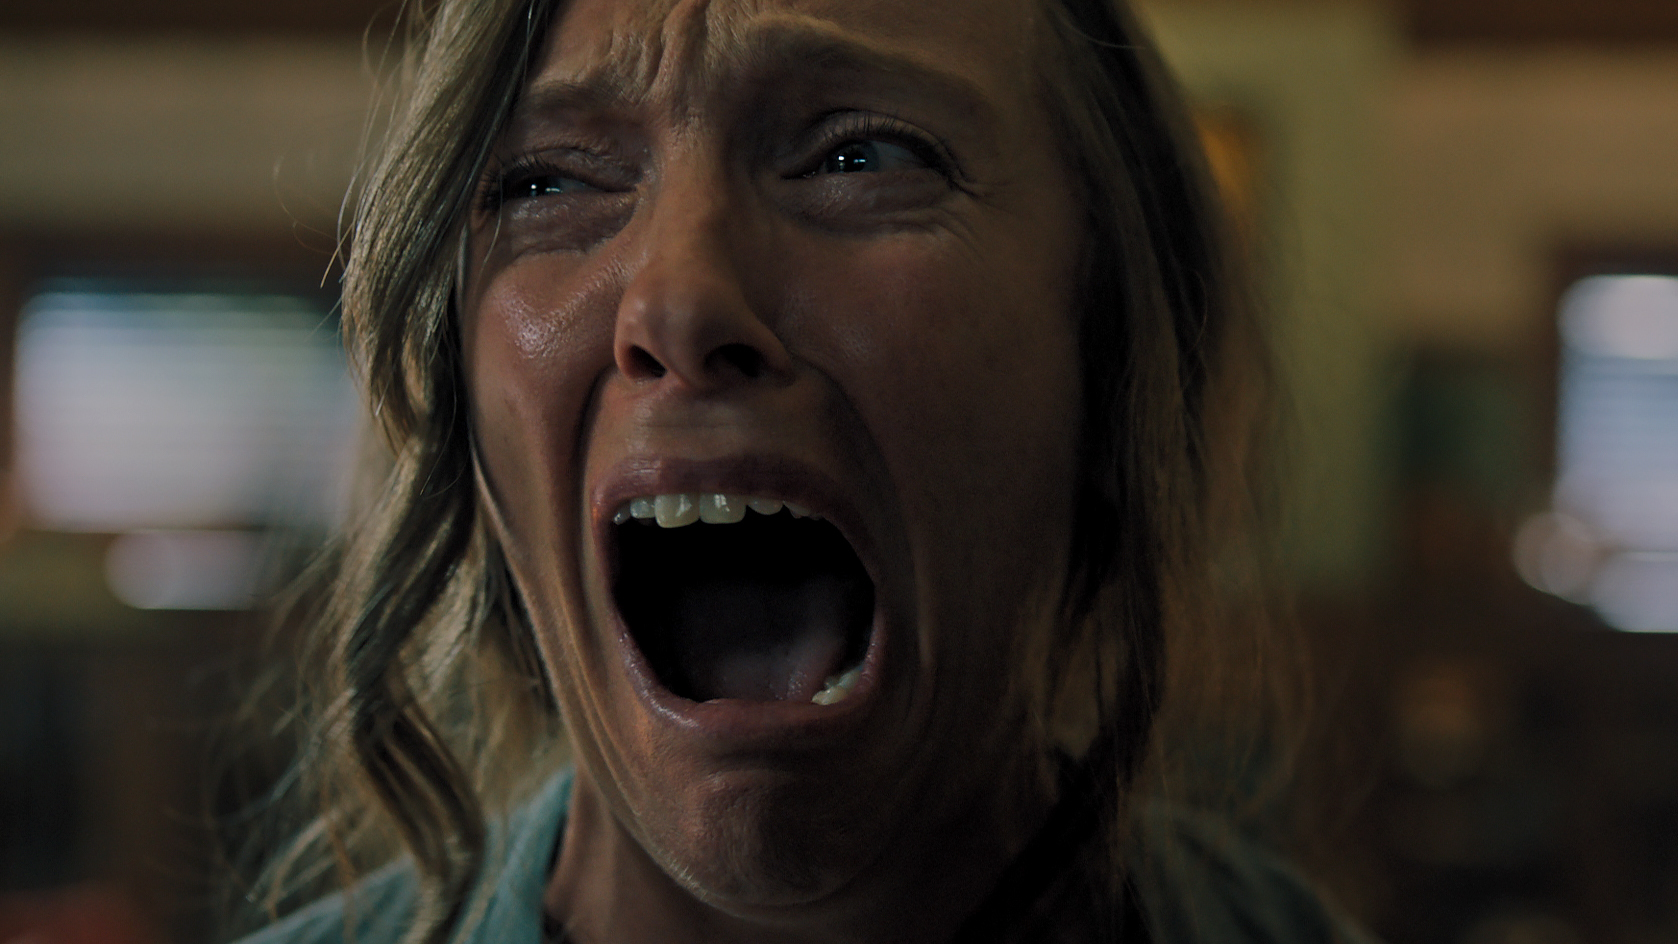 HEREDITARY Effectively Delivers Spine-Tingling Chills